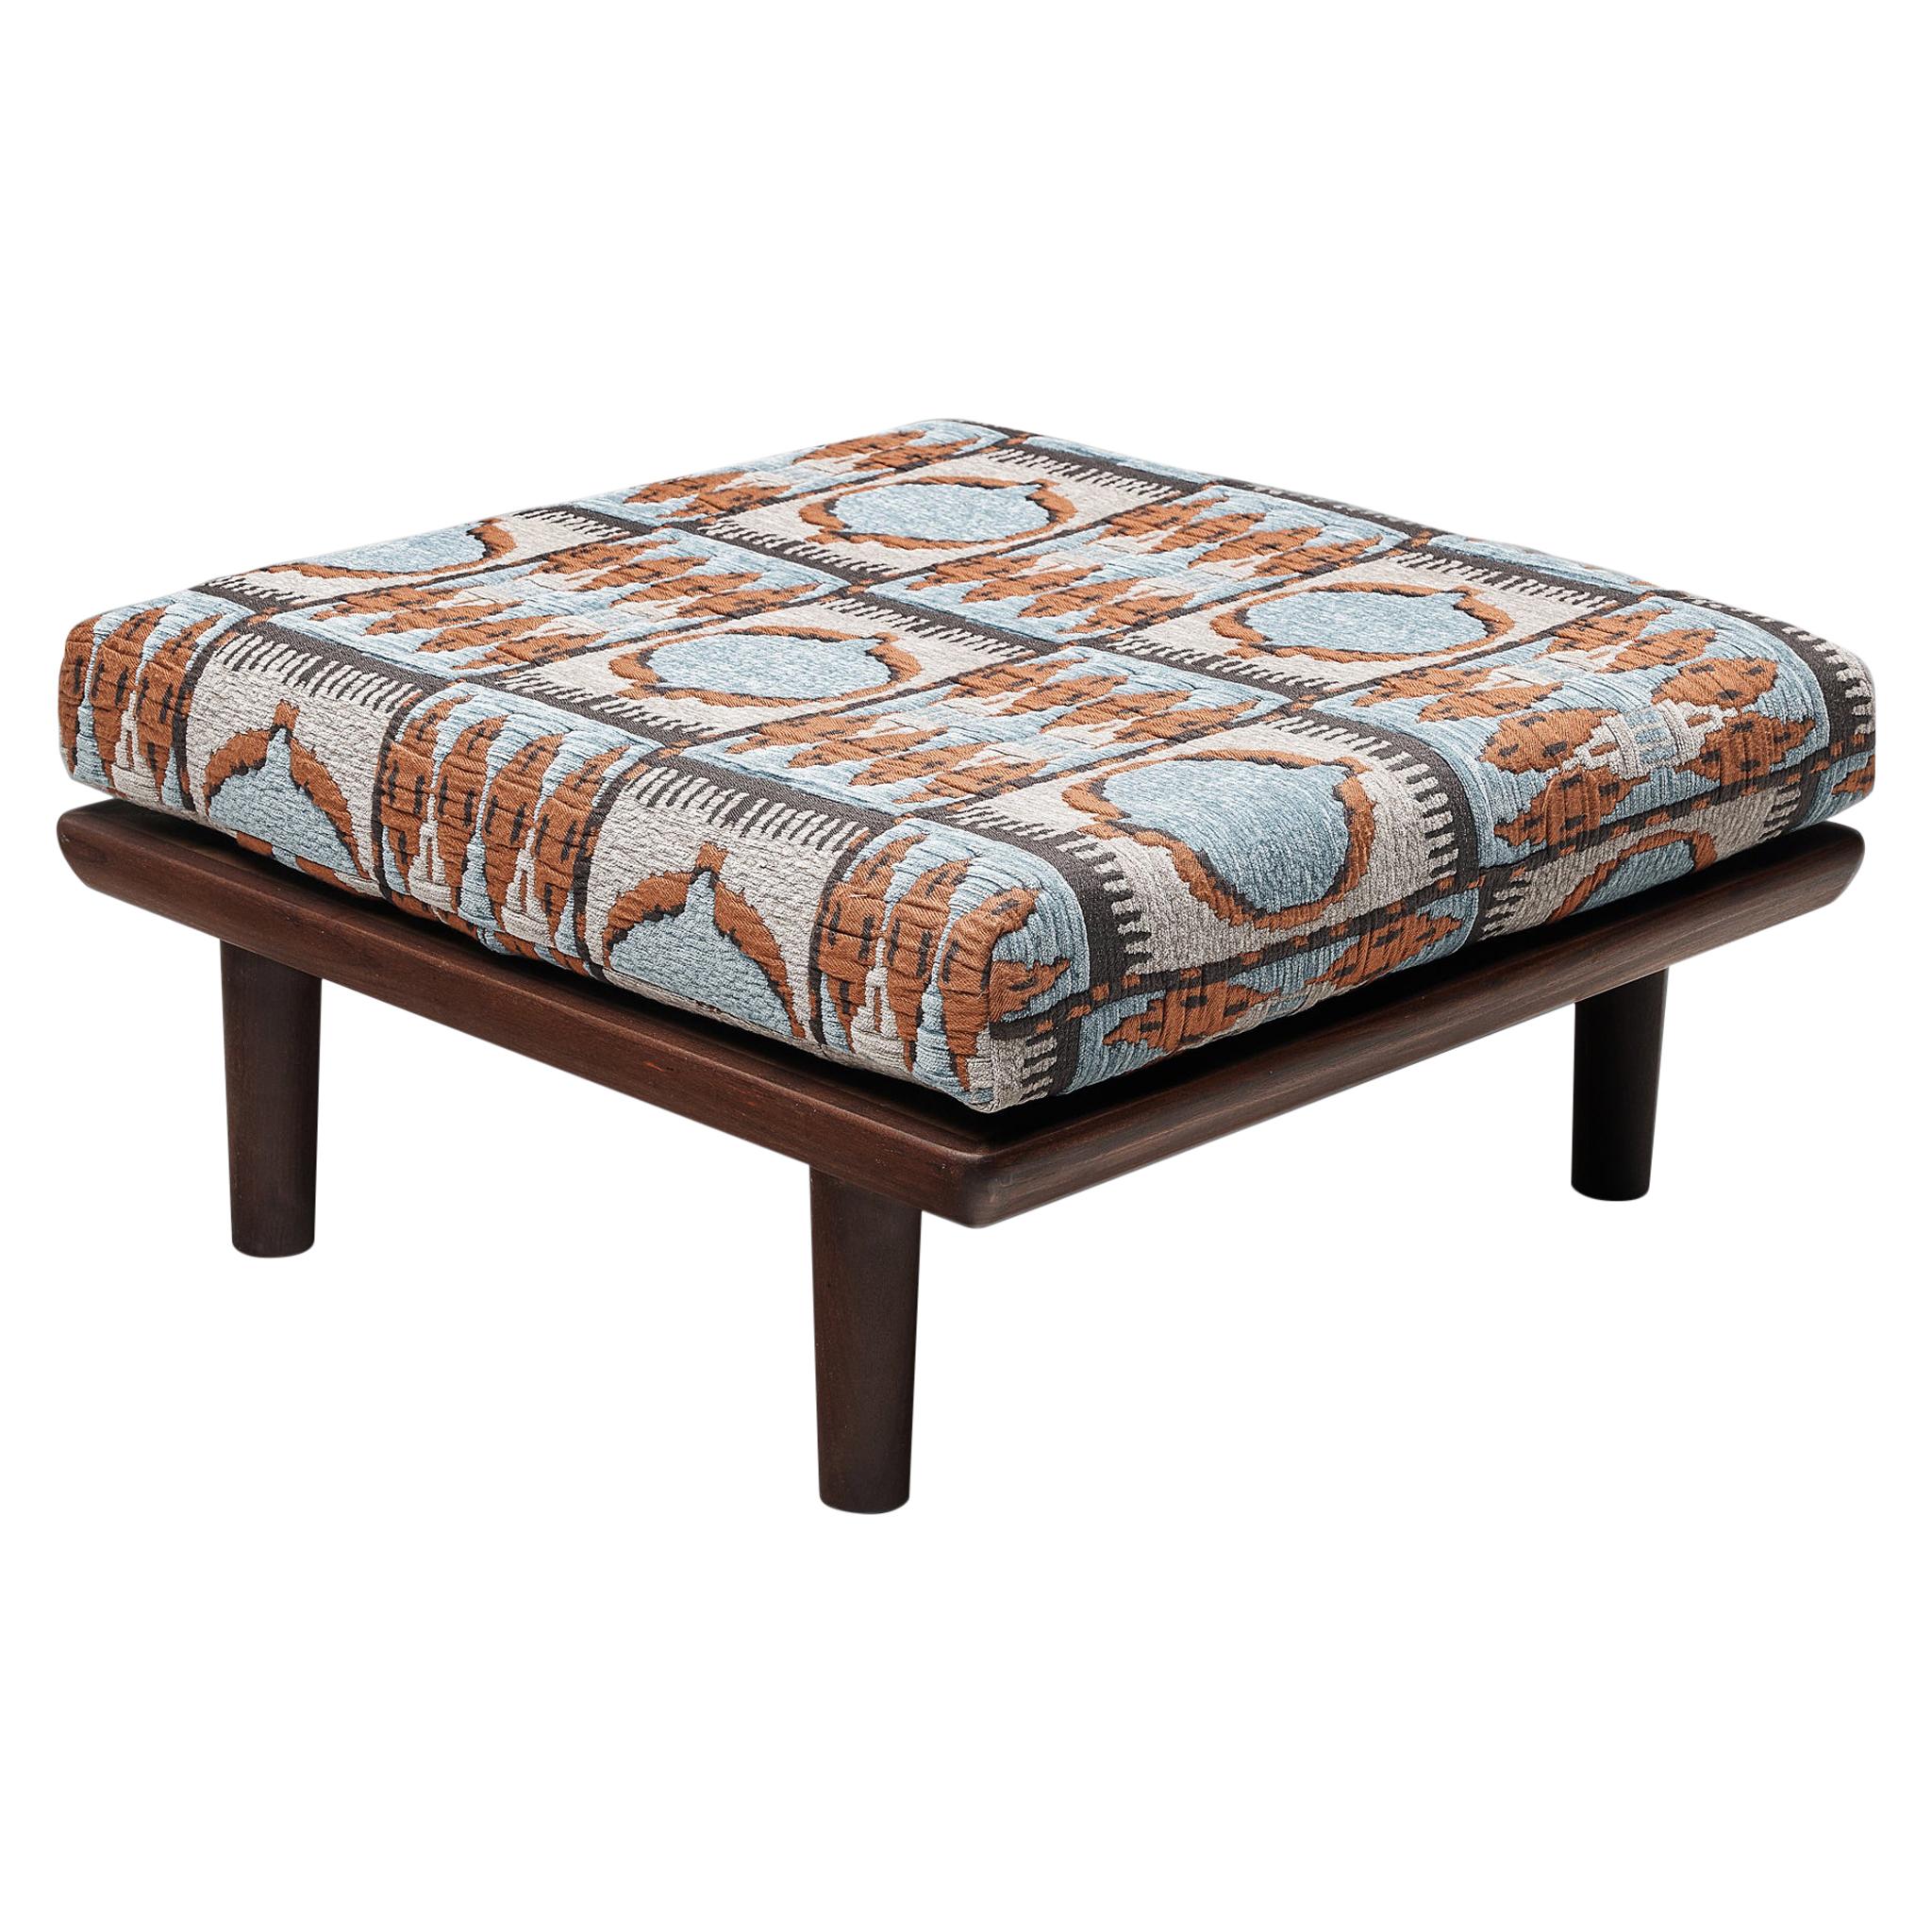 Reupholstered Ottoman in Pierre Frey by Hans Wegner for GETAMA